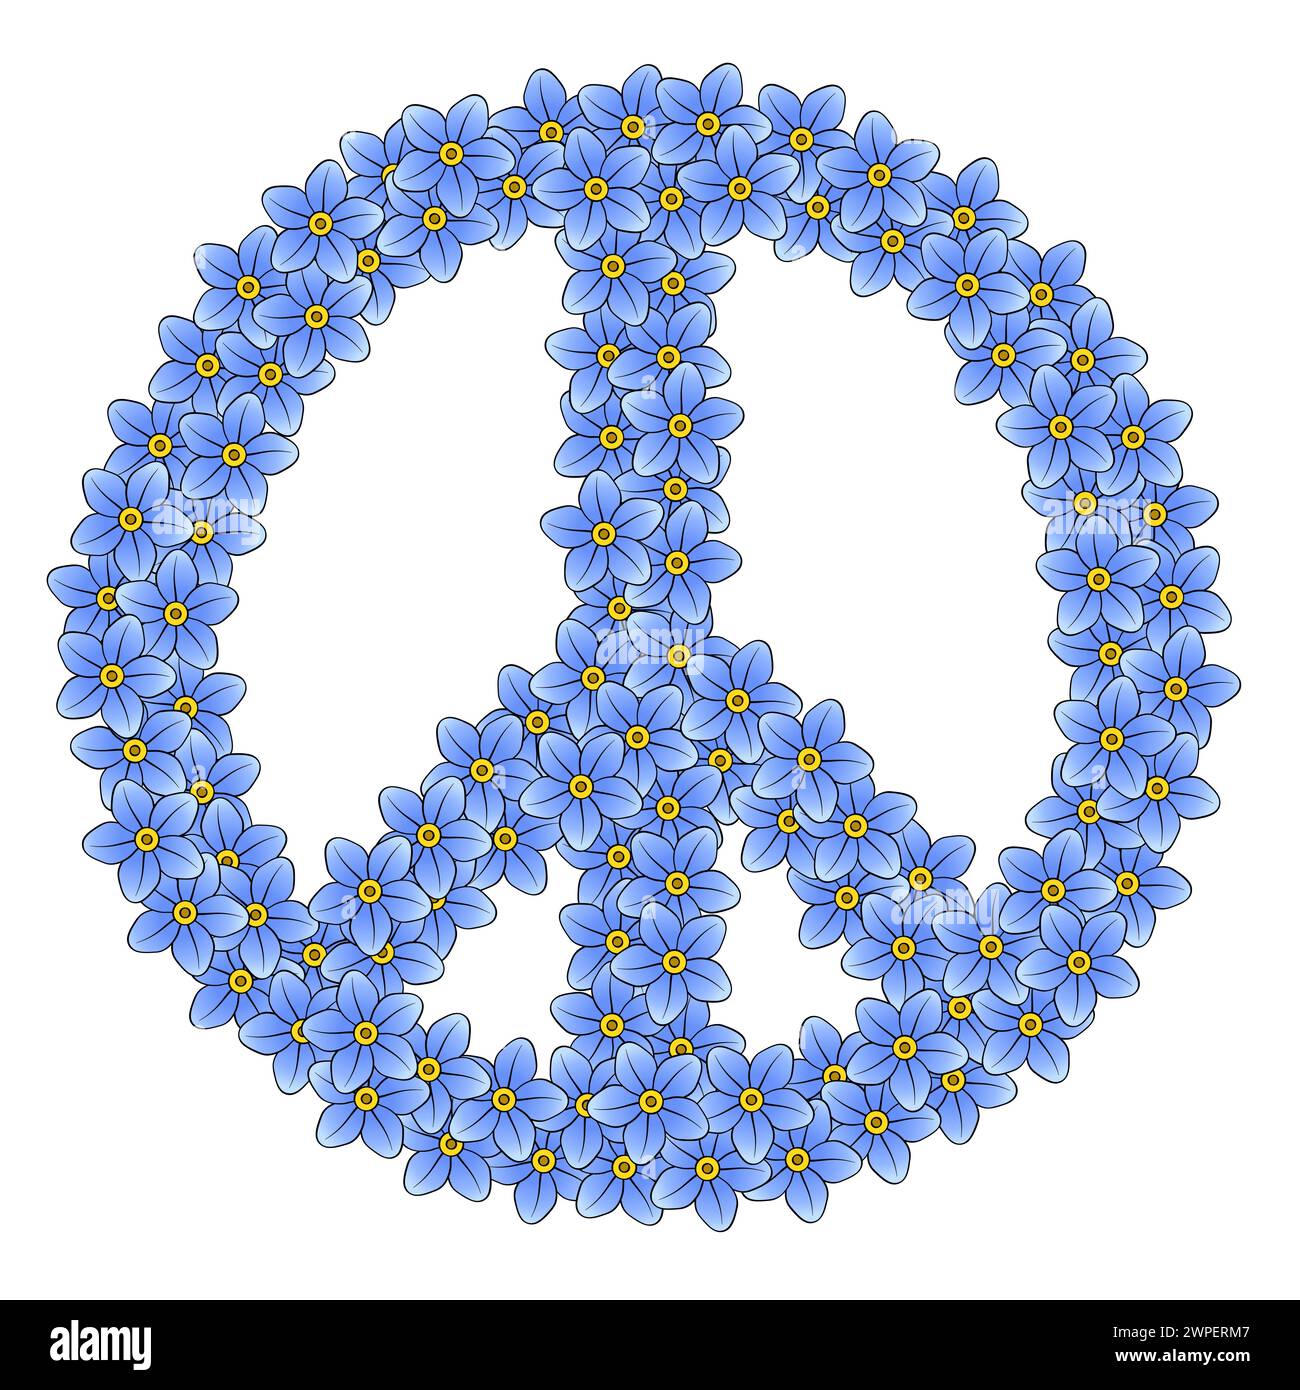 Peace sign made of 111 forget-me-not flowers. Made of 111 randomly arranged blue blossoms, a symbol of the anti-war movement. Stock Photo